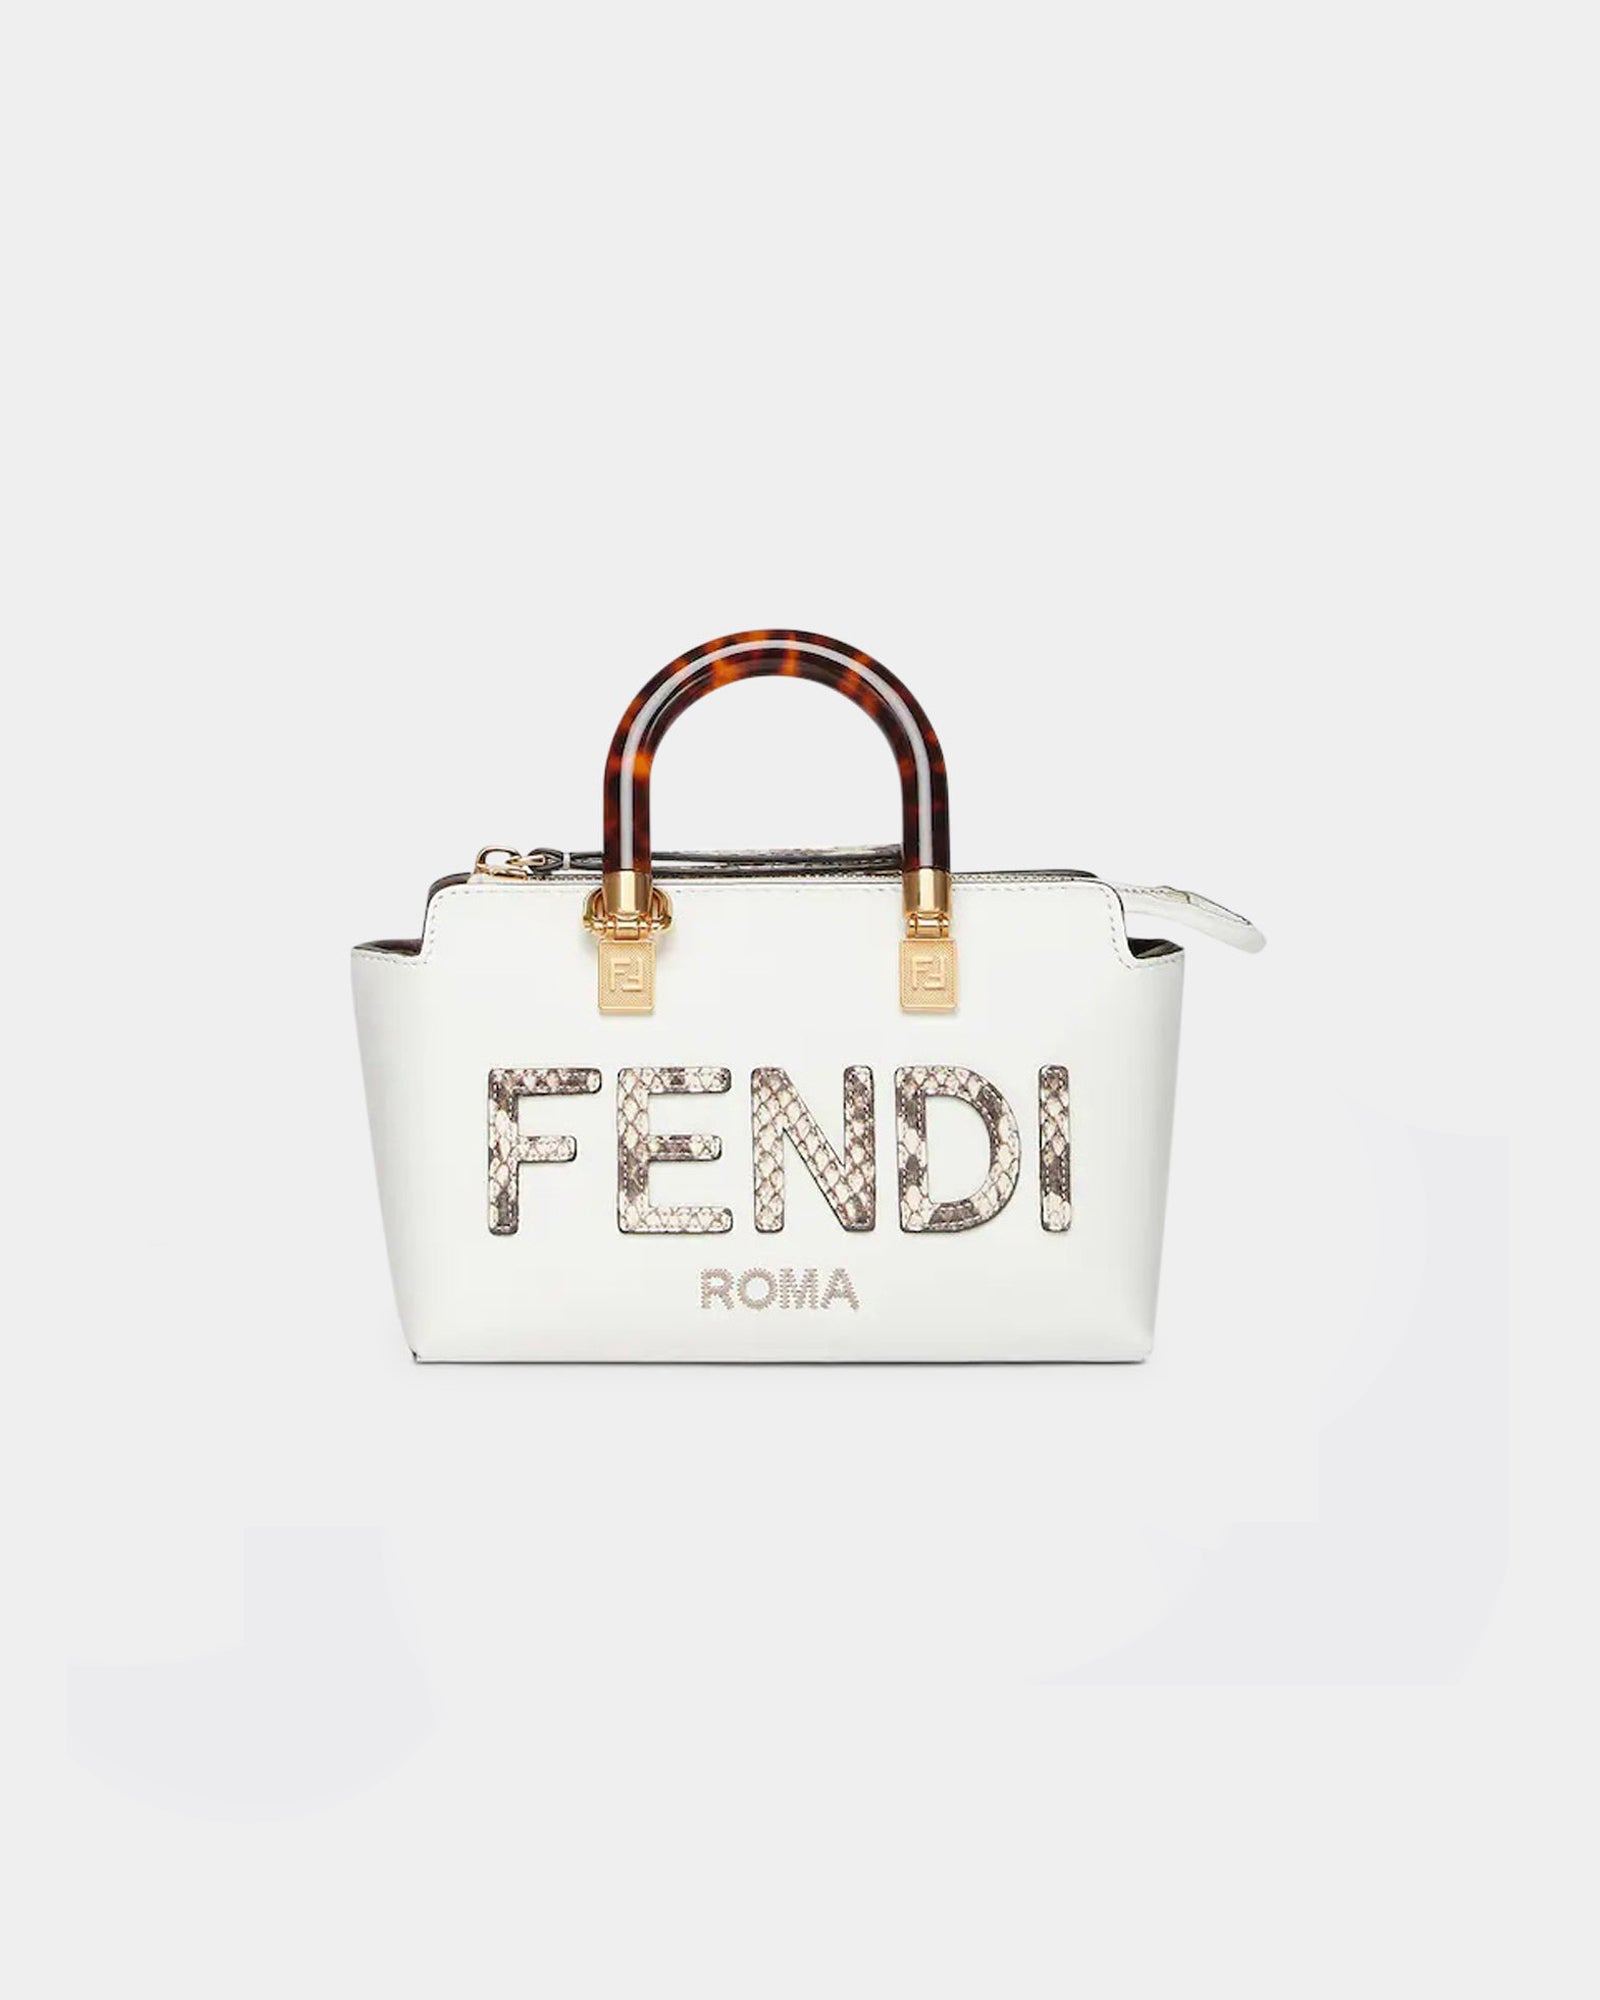 Fendi Beige Way Large Leather Tote Bag - - Leather in Brown